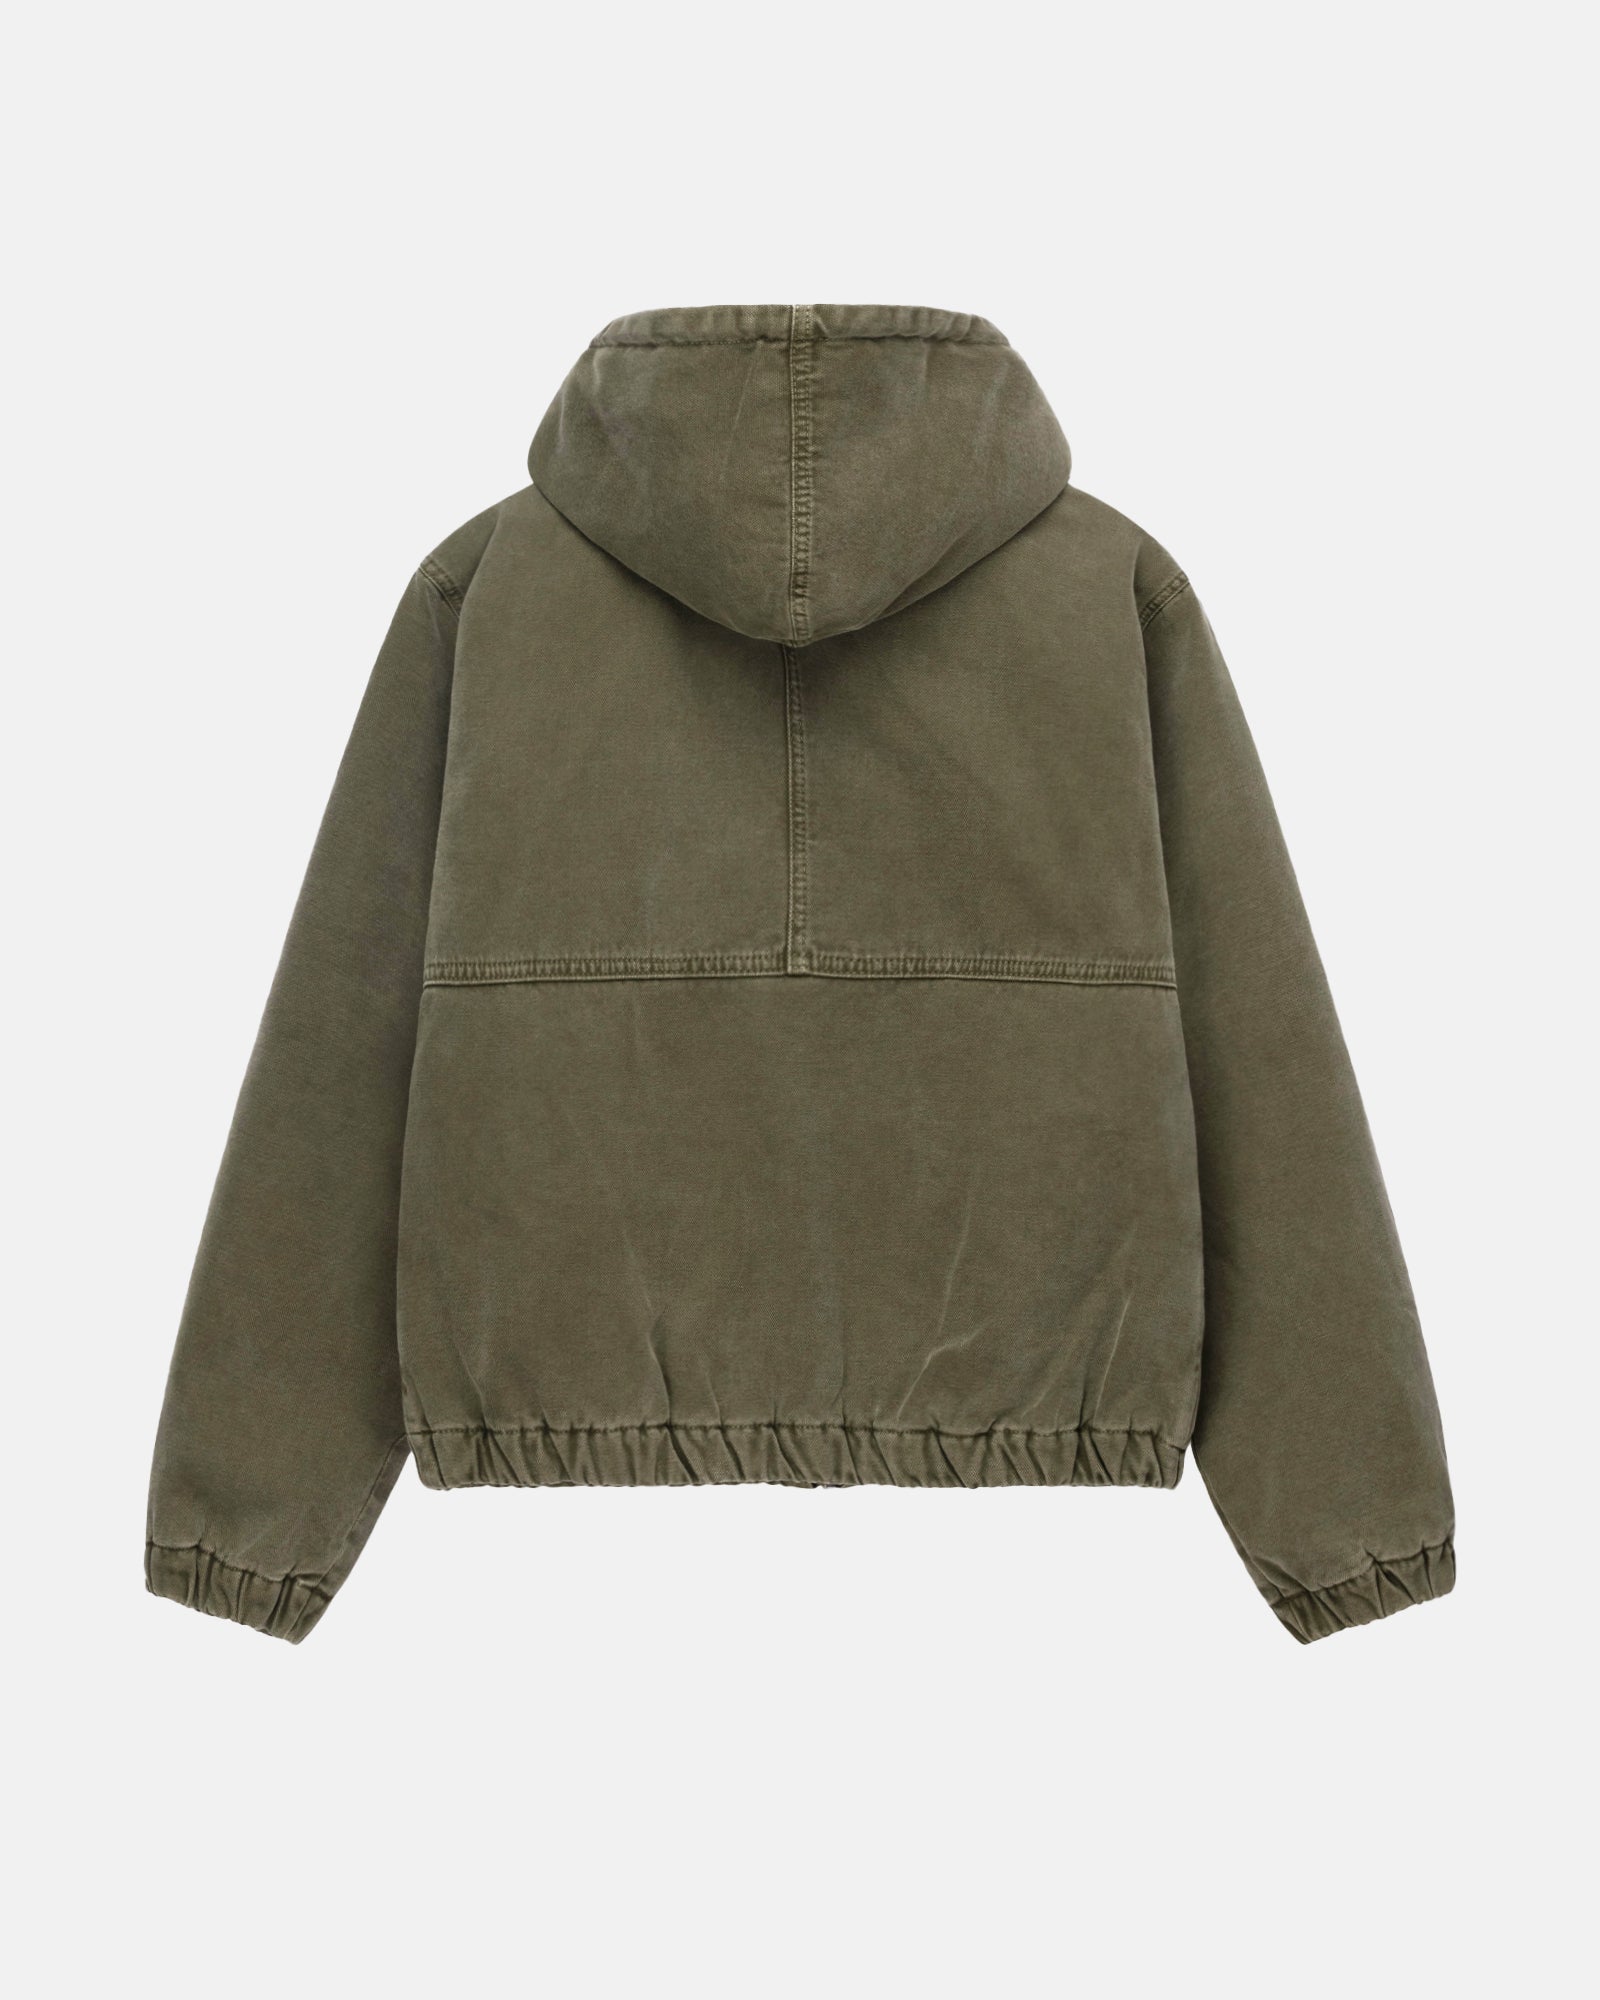 New Arrivals: Hoodies, Beanies, Jackets & More by Stüssy